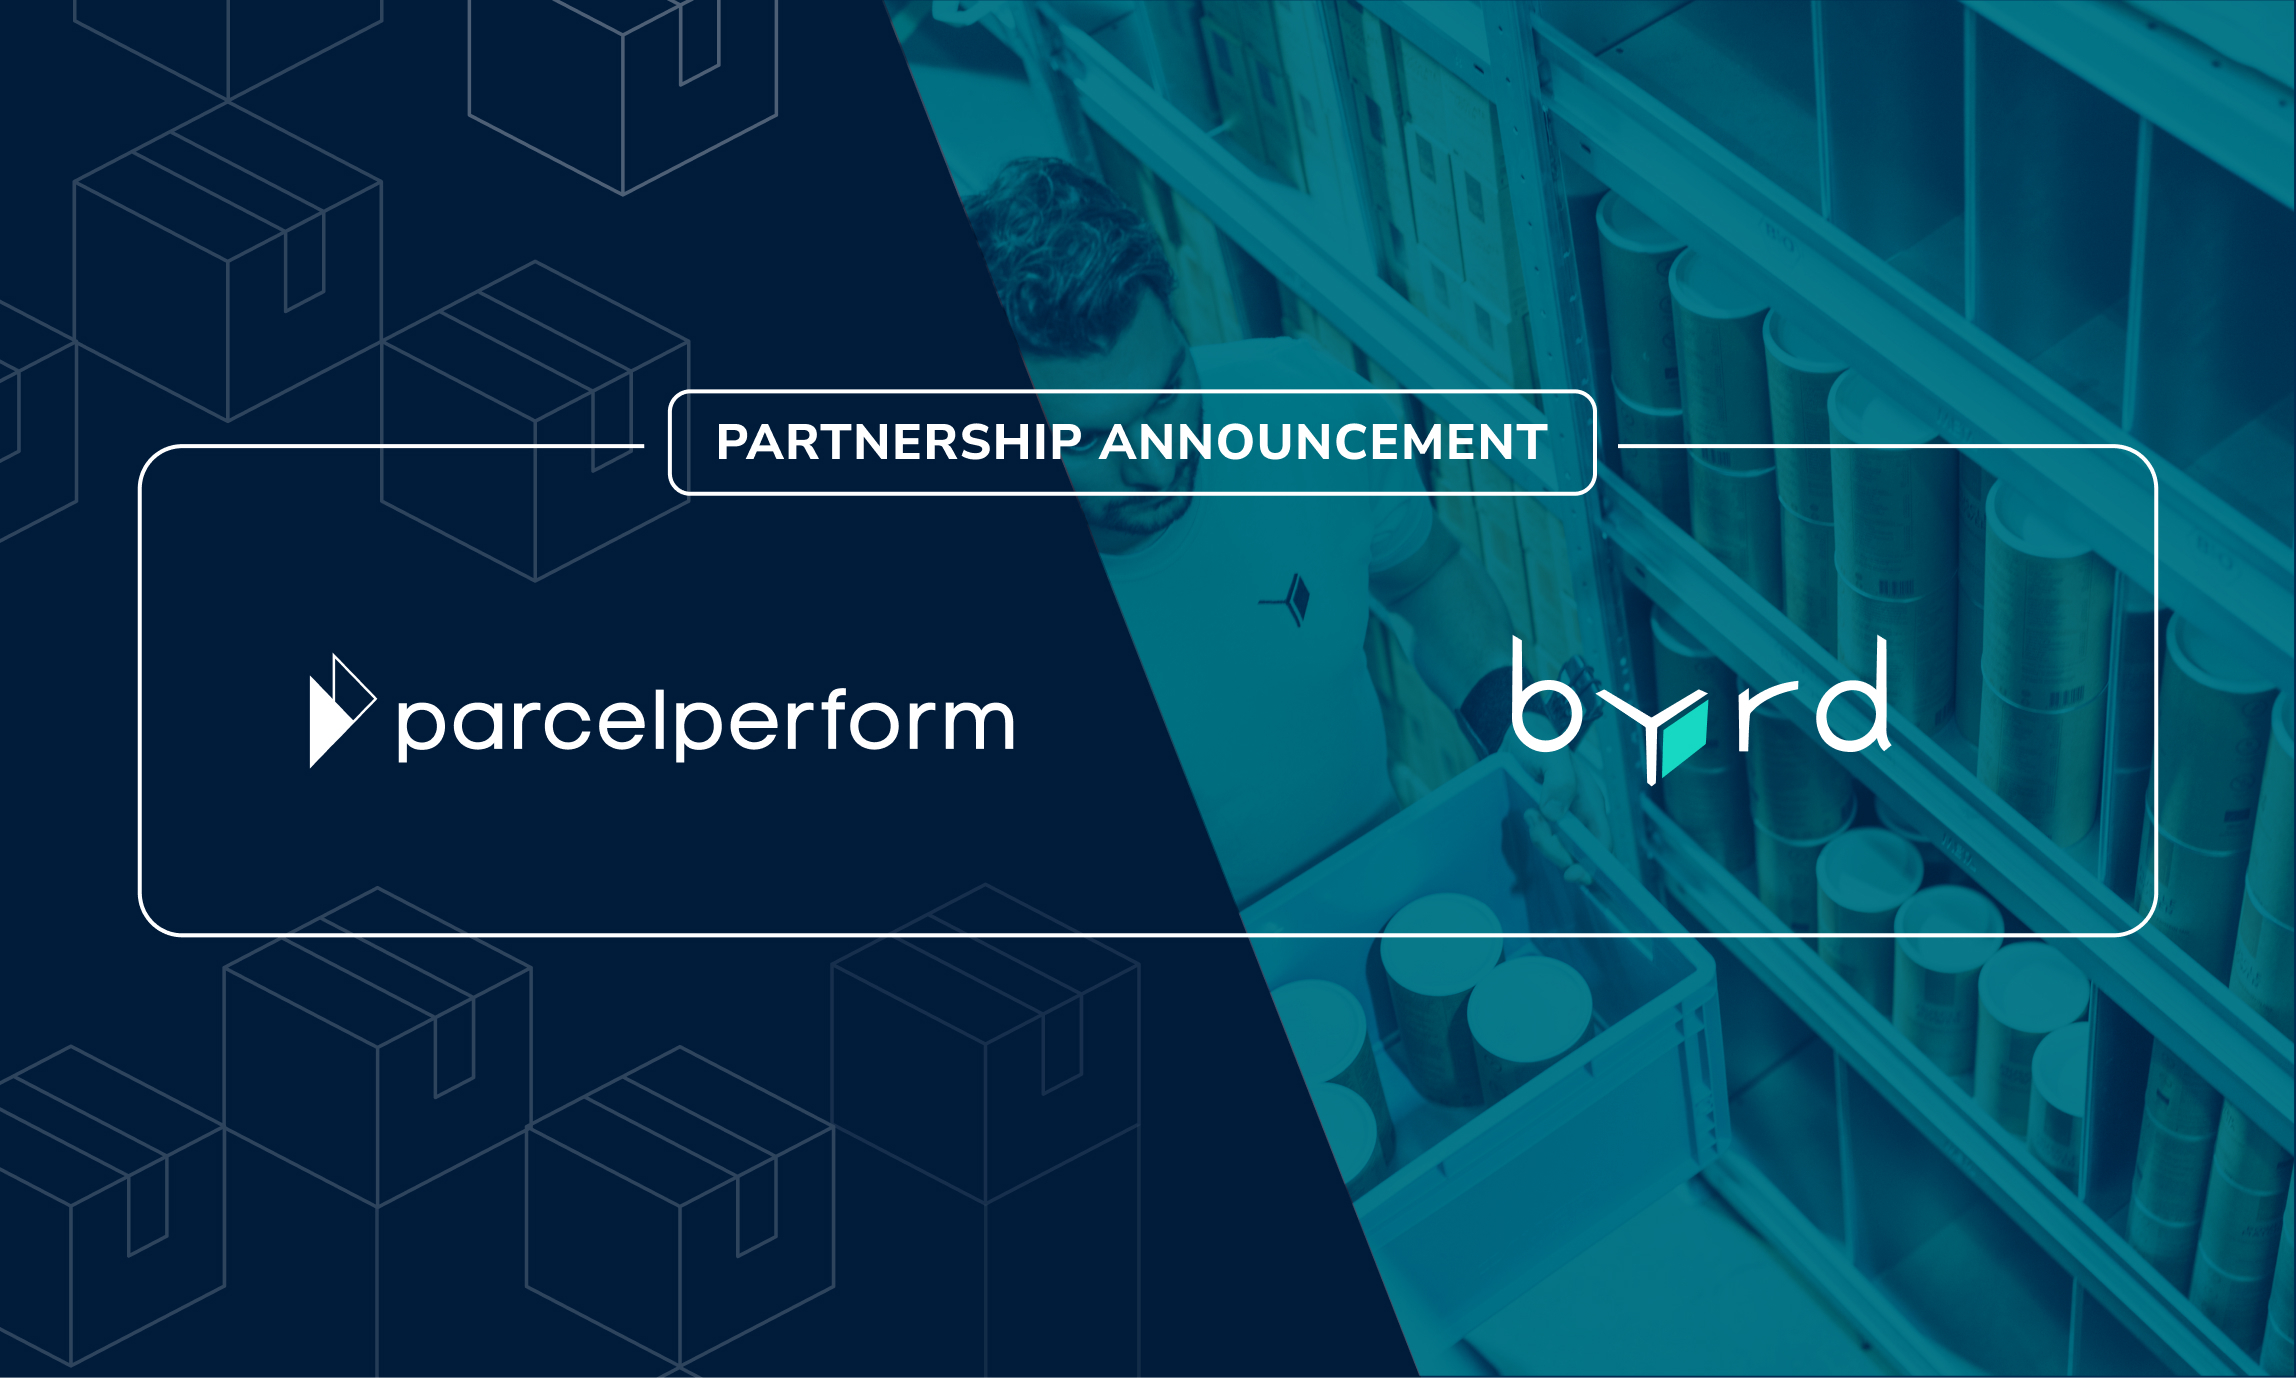 Partnership announcement between Parcel Perform and byrd to enable last mile visibility for europe's leading e-commerce enterprises and businesses. image is a composite of parcel perform and byrd's logos. background behind parcel perform is boxes. background behind byrd is man in warehouse and warehouse shelves